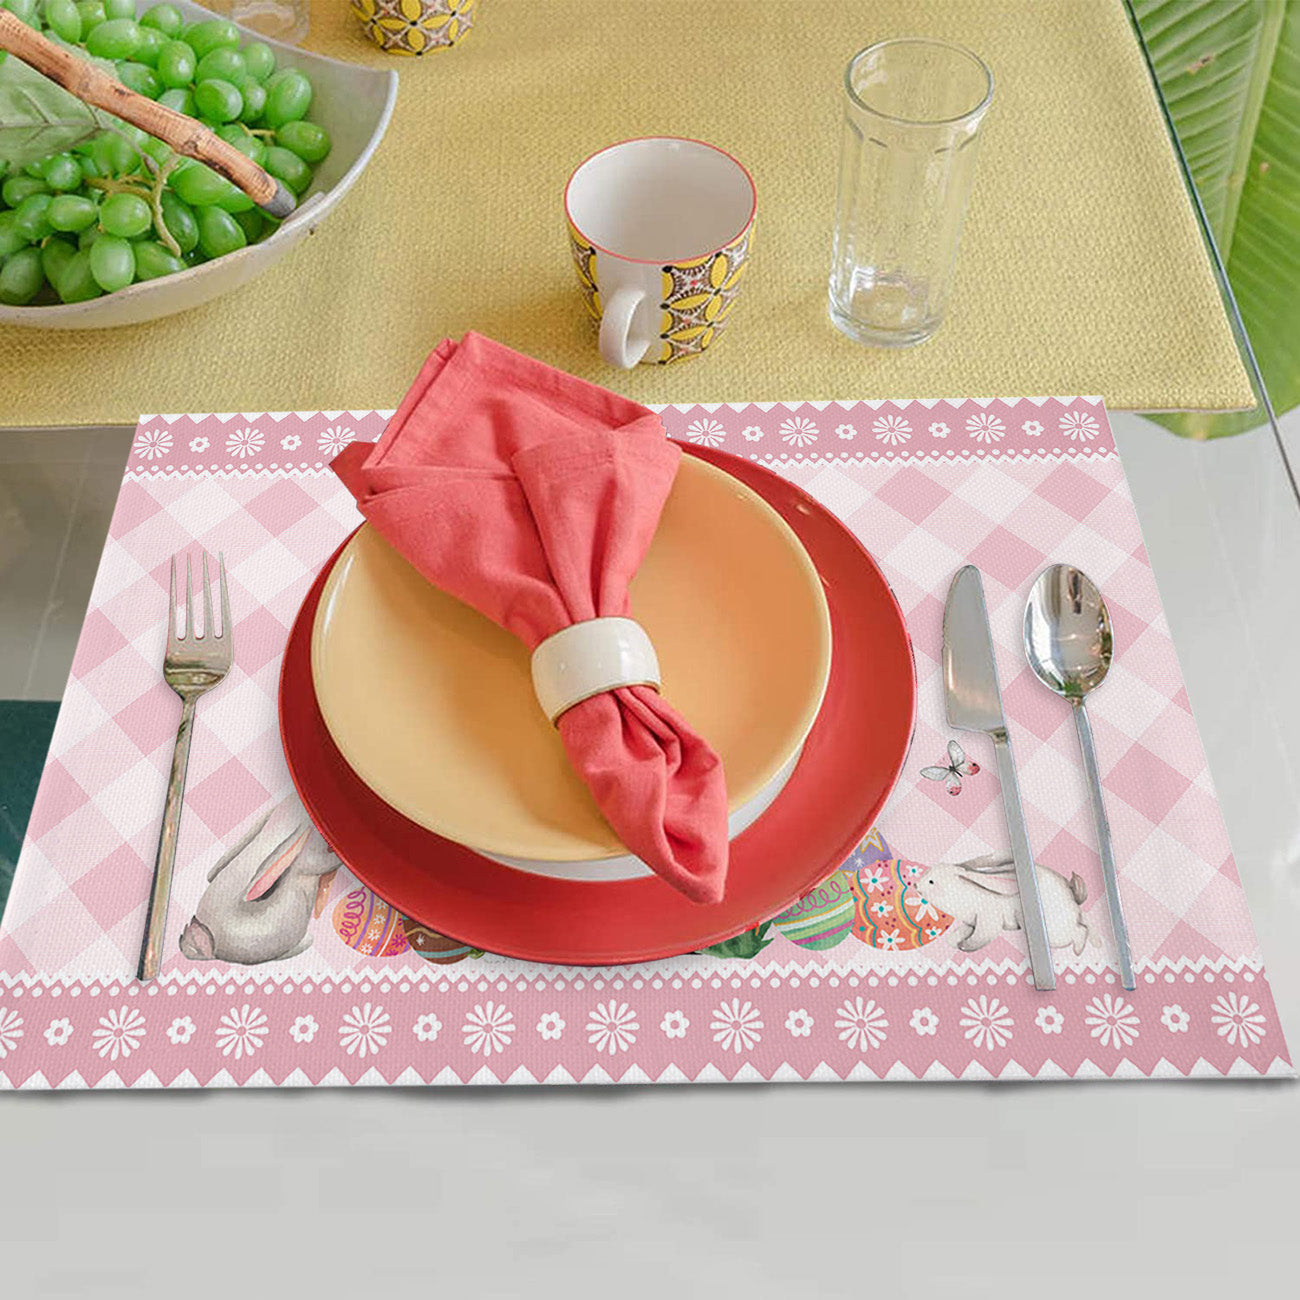 Gnome Holding Egg - Easter Themed Placemat